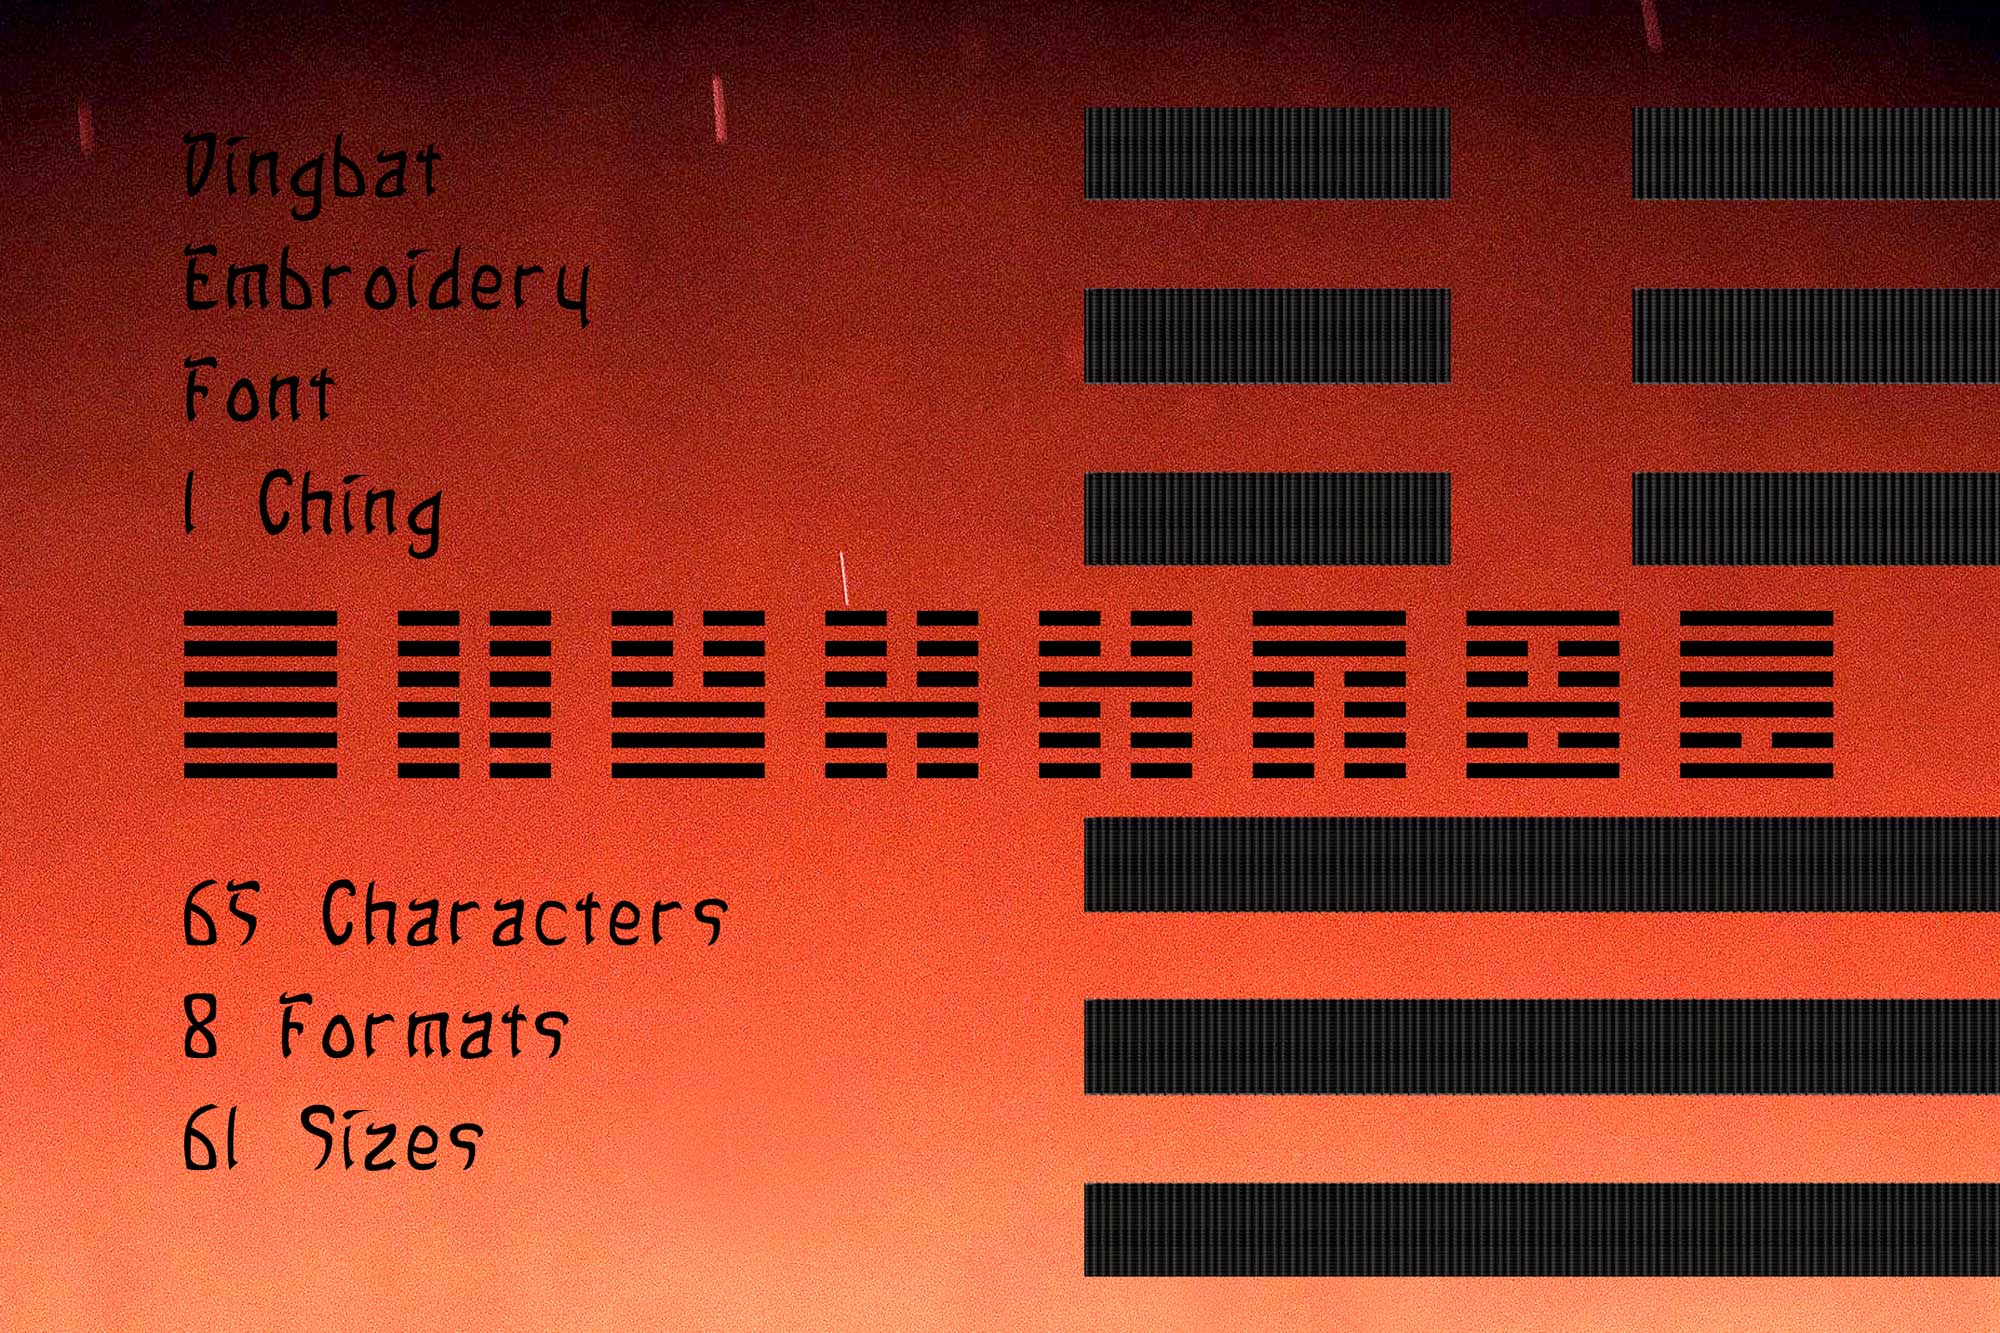 I Ching Line Characters Dingbat Font 